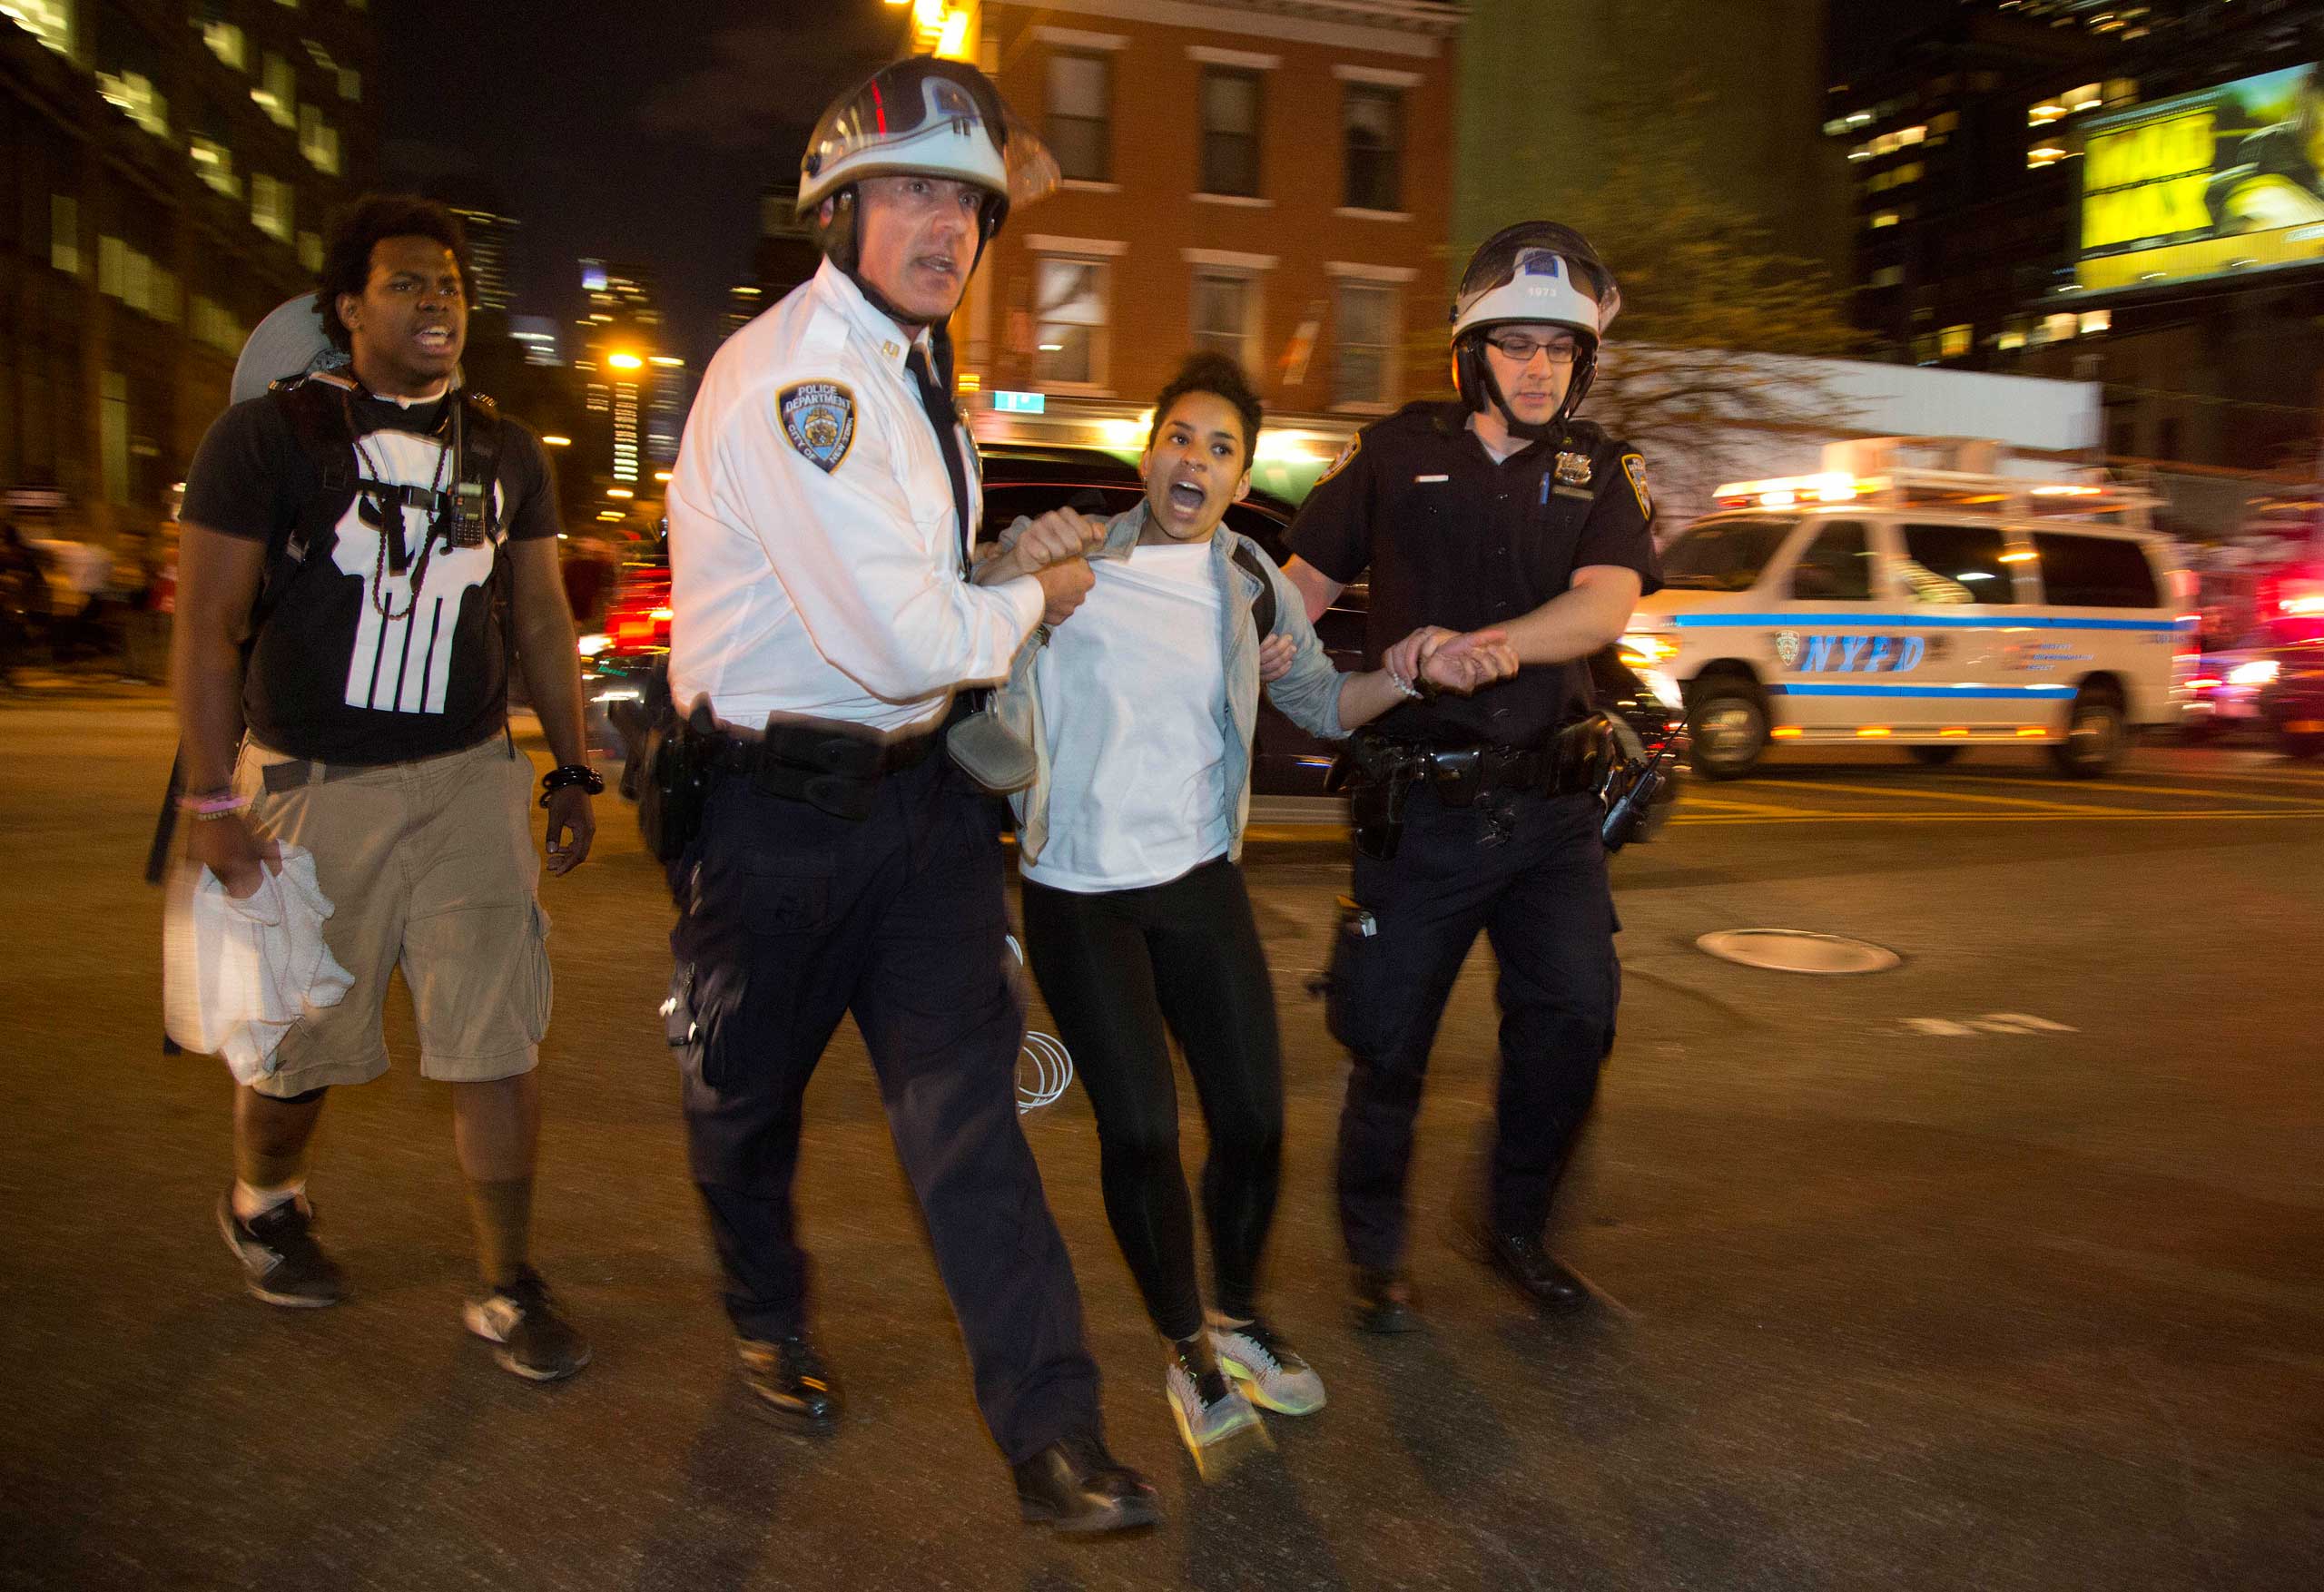 New York City police escort a woman off the street and back onto the sidewalk where she was released during a protest in New York City on April 29, 2015.